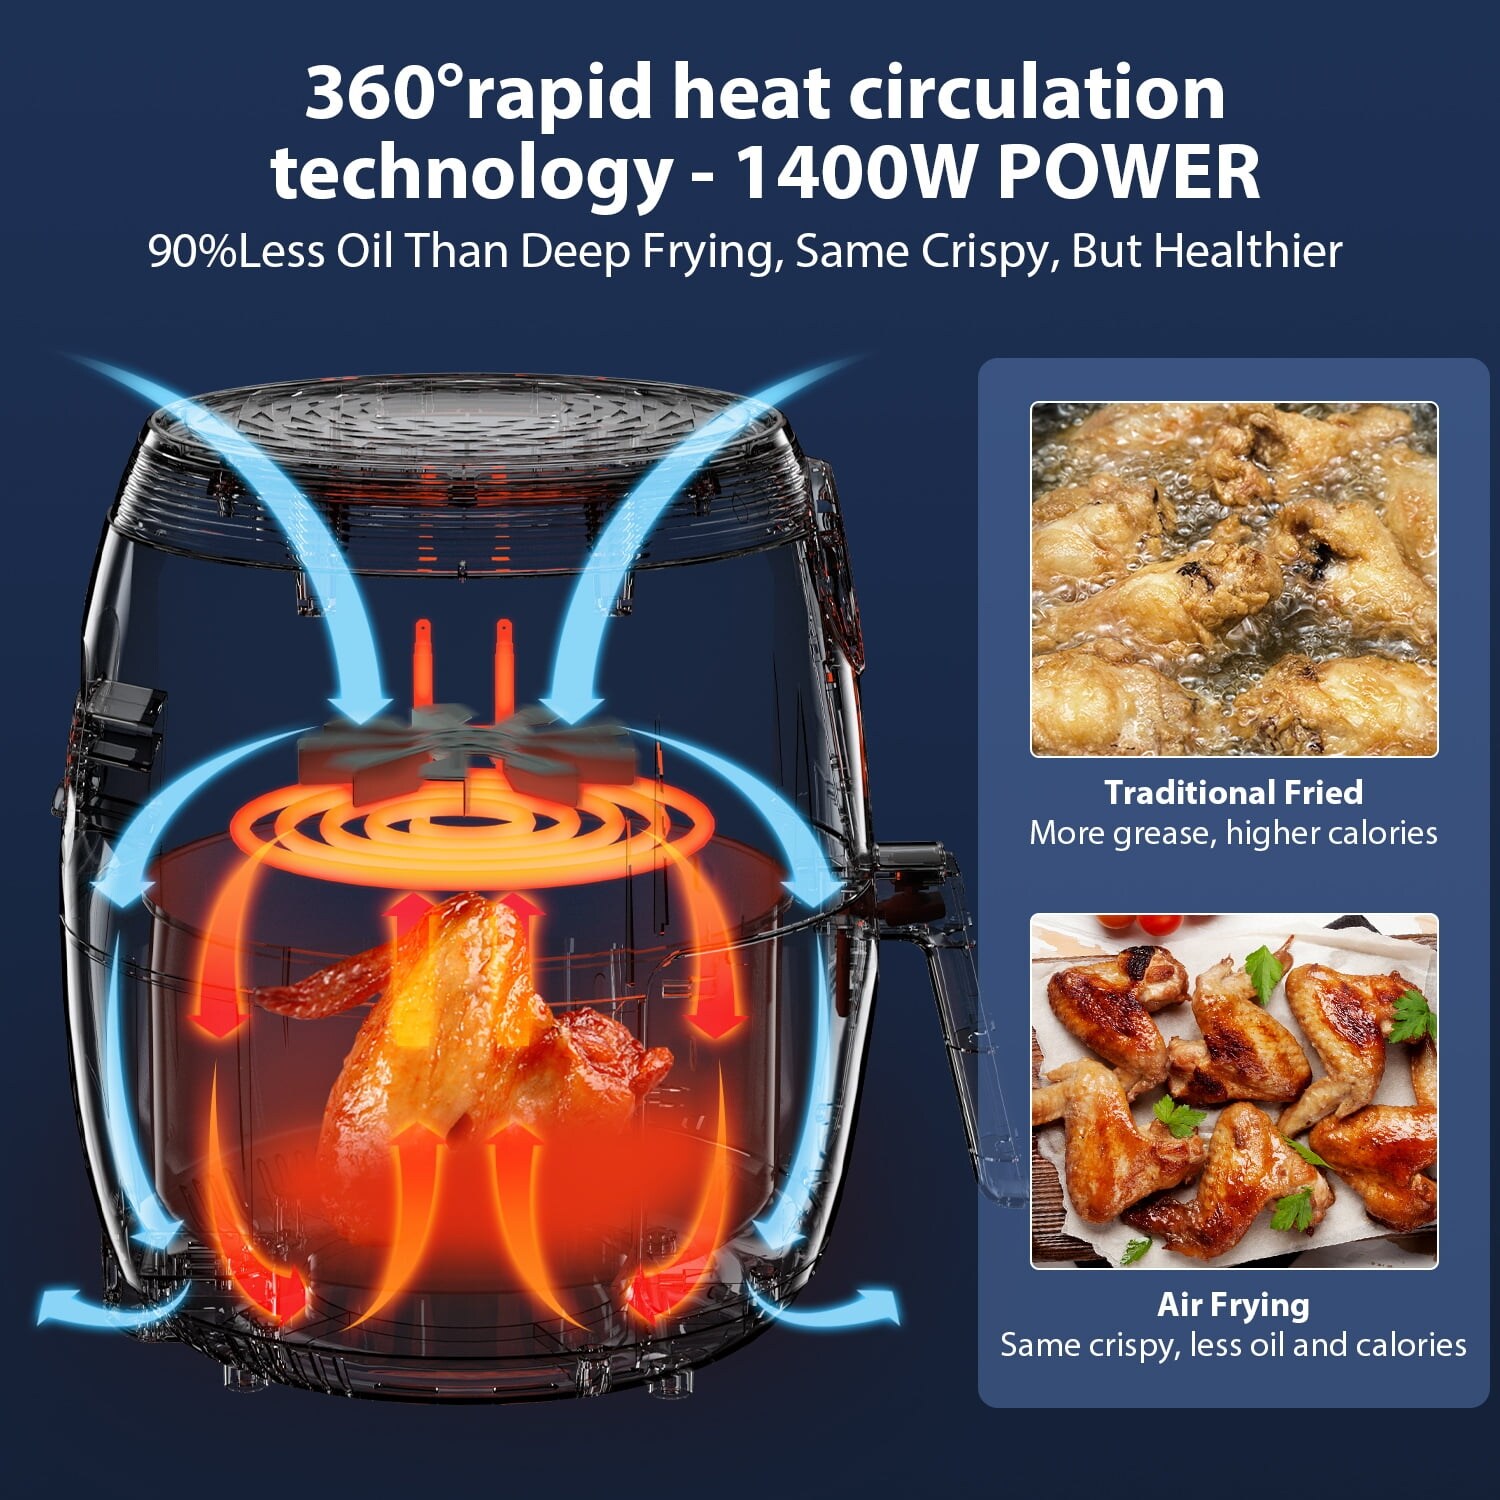 4.2 Qt. Black Air Fryer with Rapid Air Technology-1400 Watts Valentine's Day